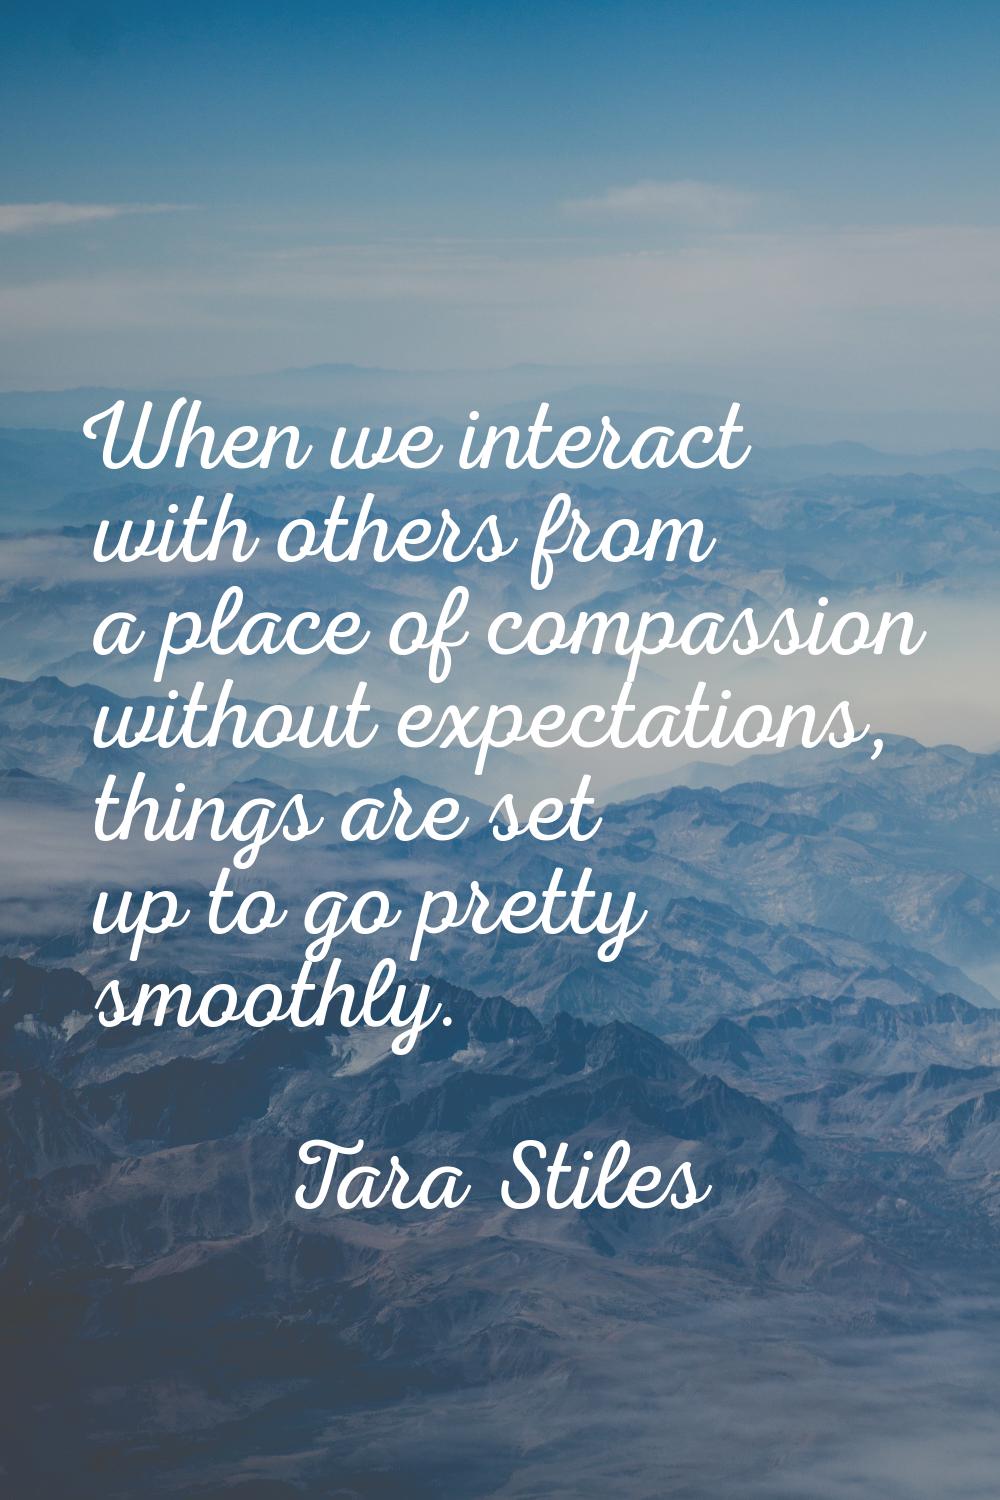 When we interact with others from a place of compassion without expectations, things are set up to 